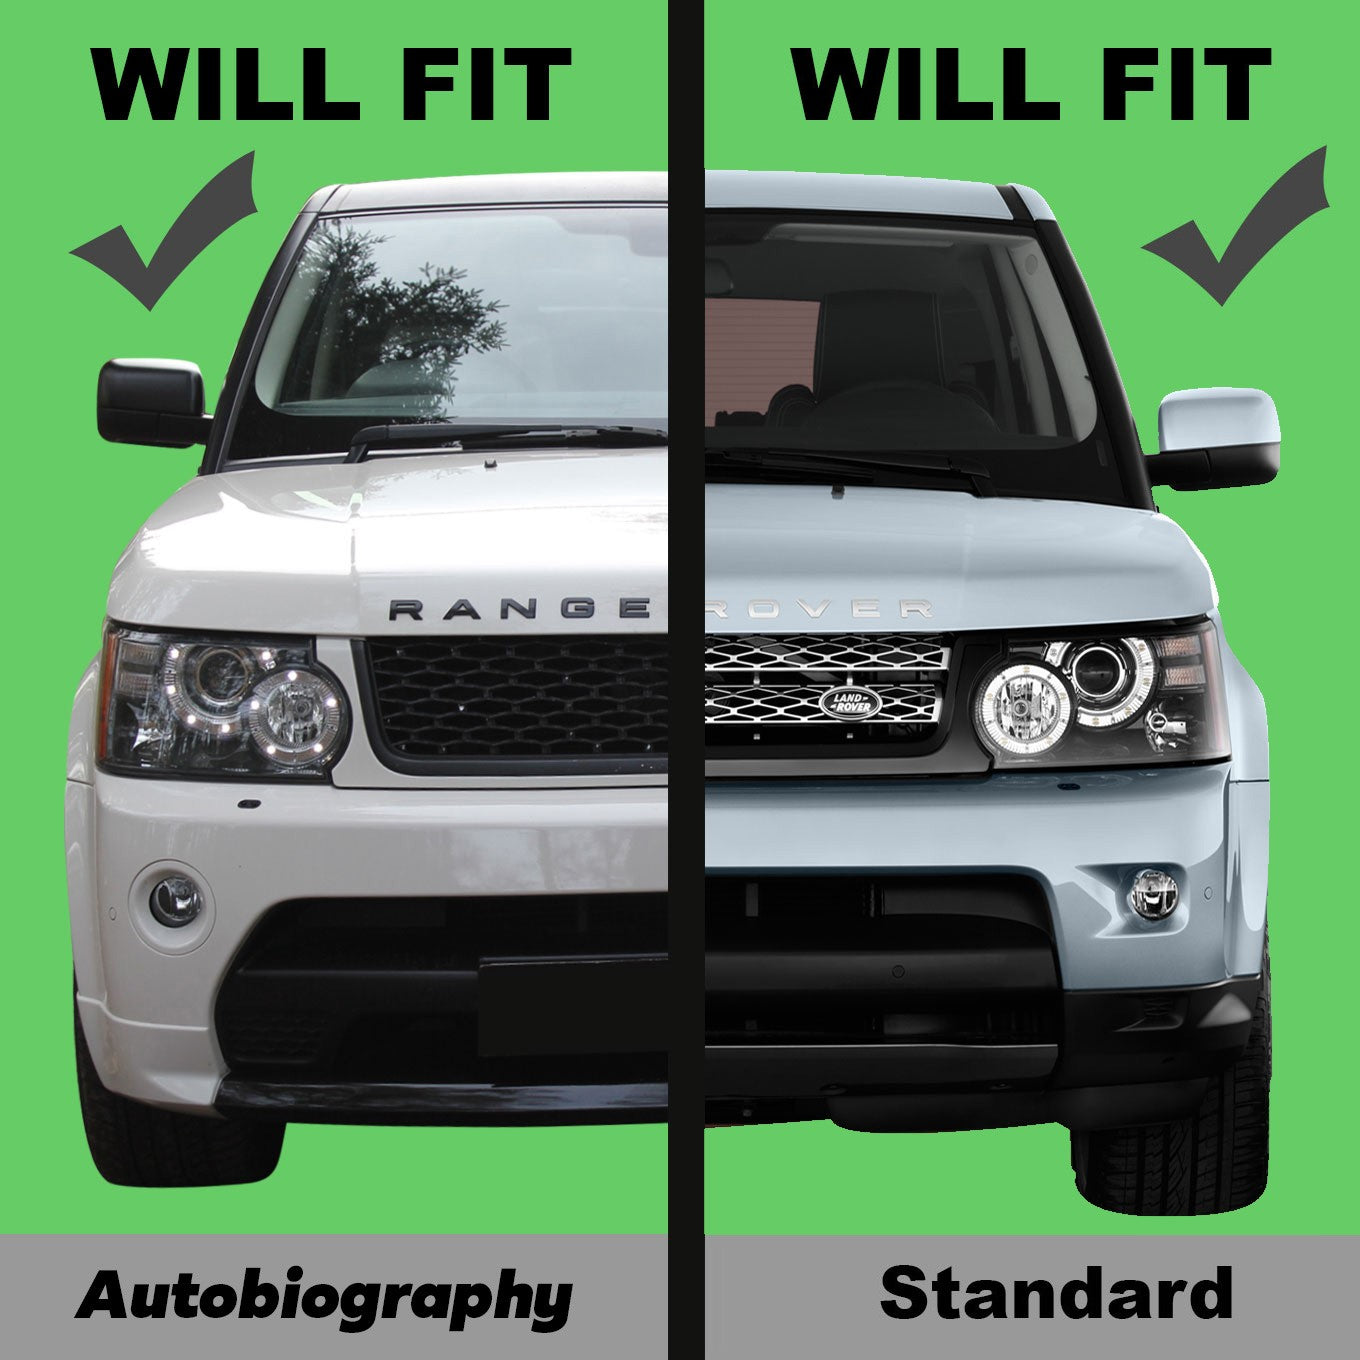 Gloss Black "Autobiography style" grille to fit Range Rover Sport 2010 on